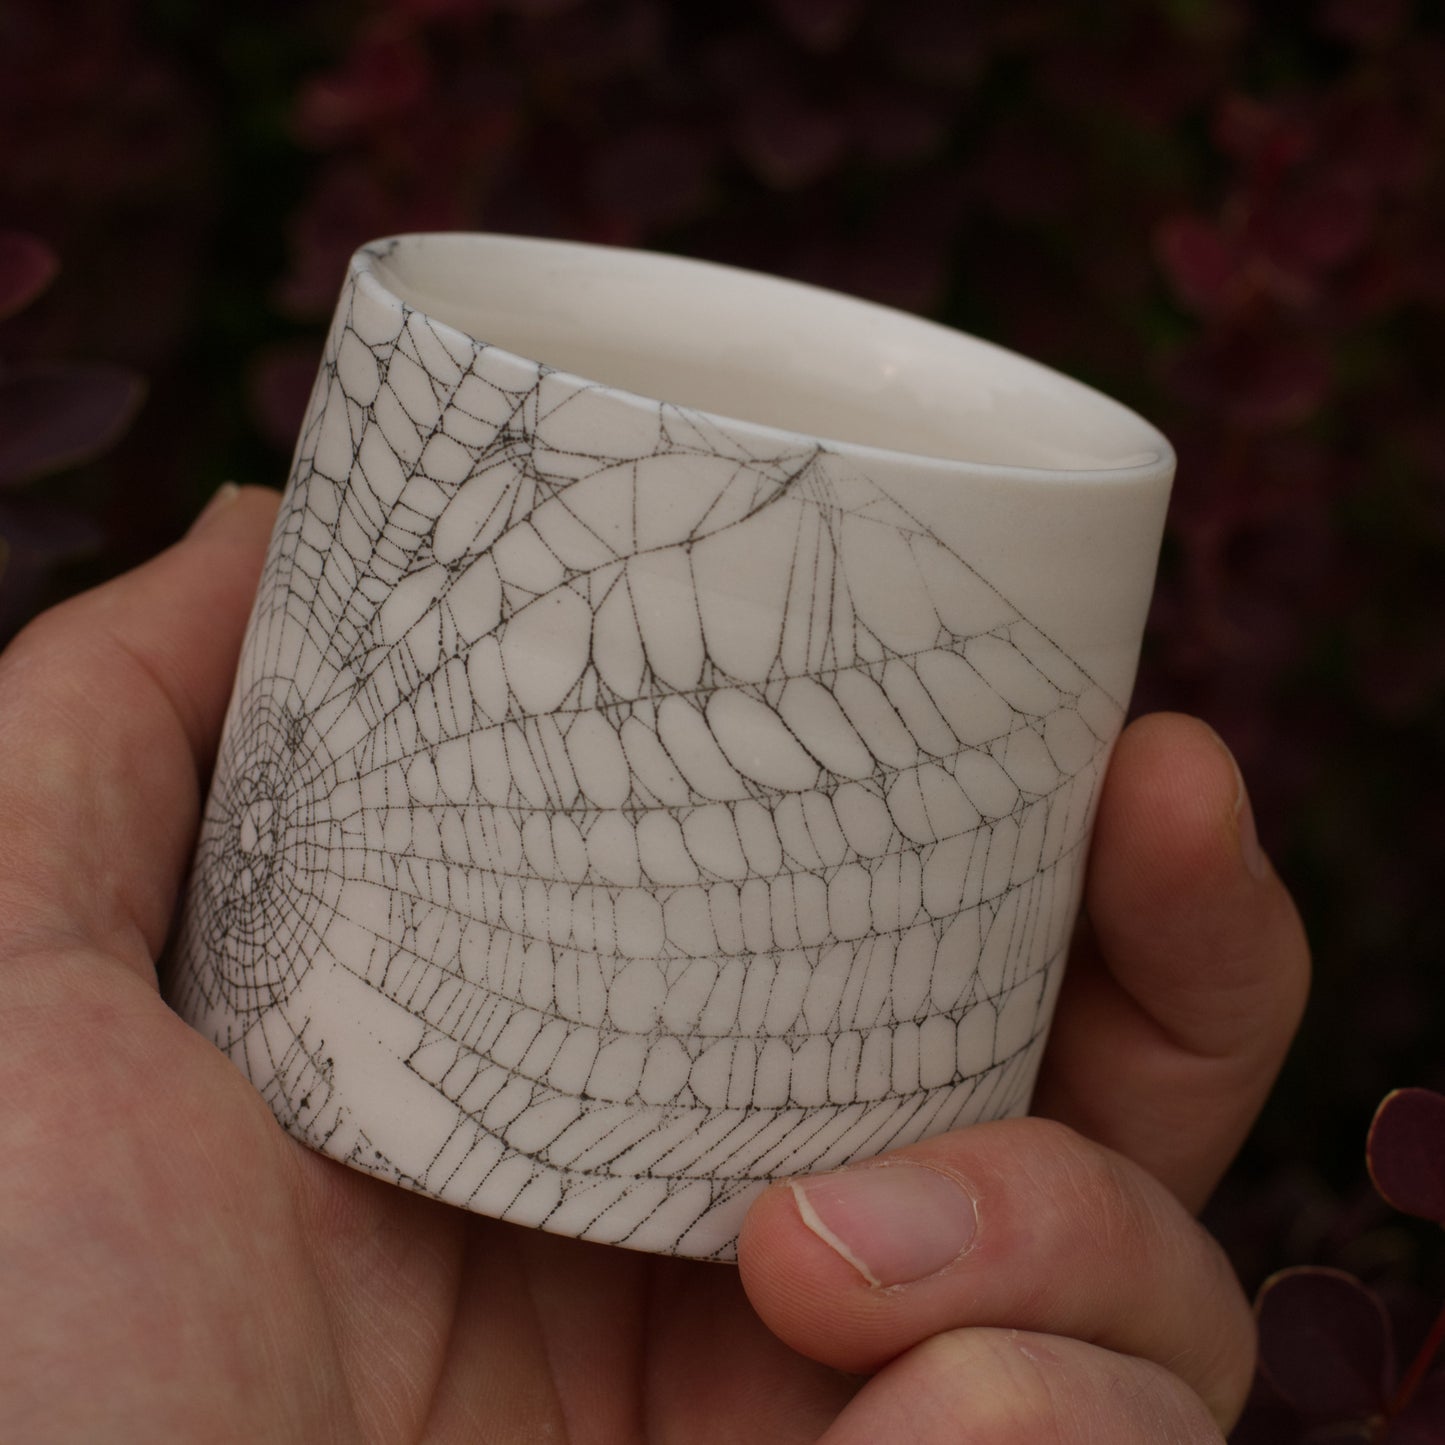 Web On Clay (052), Collected August 23, 2022